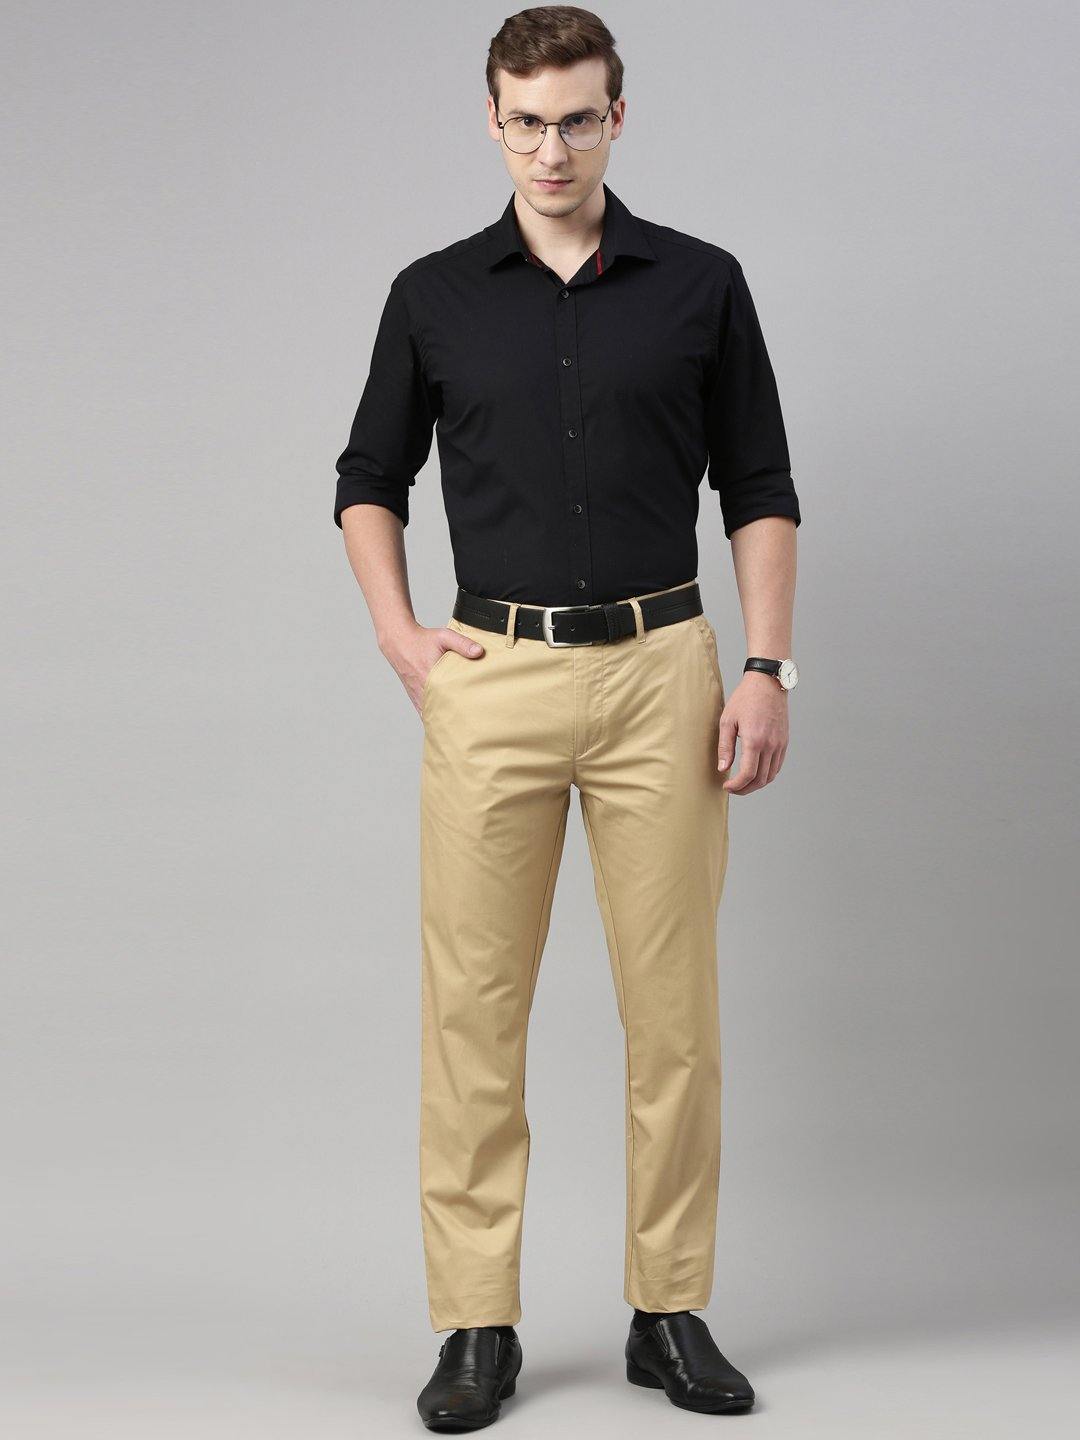 Brown Stylish And Trendy Formal Mens Cotton Pant at Best Price in Sidhi   Nehal MenS